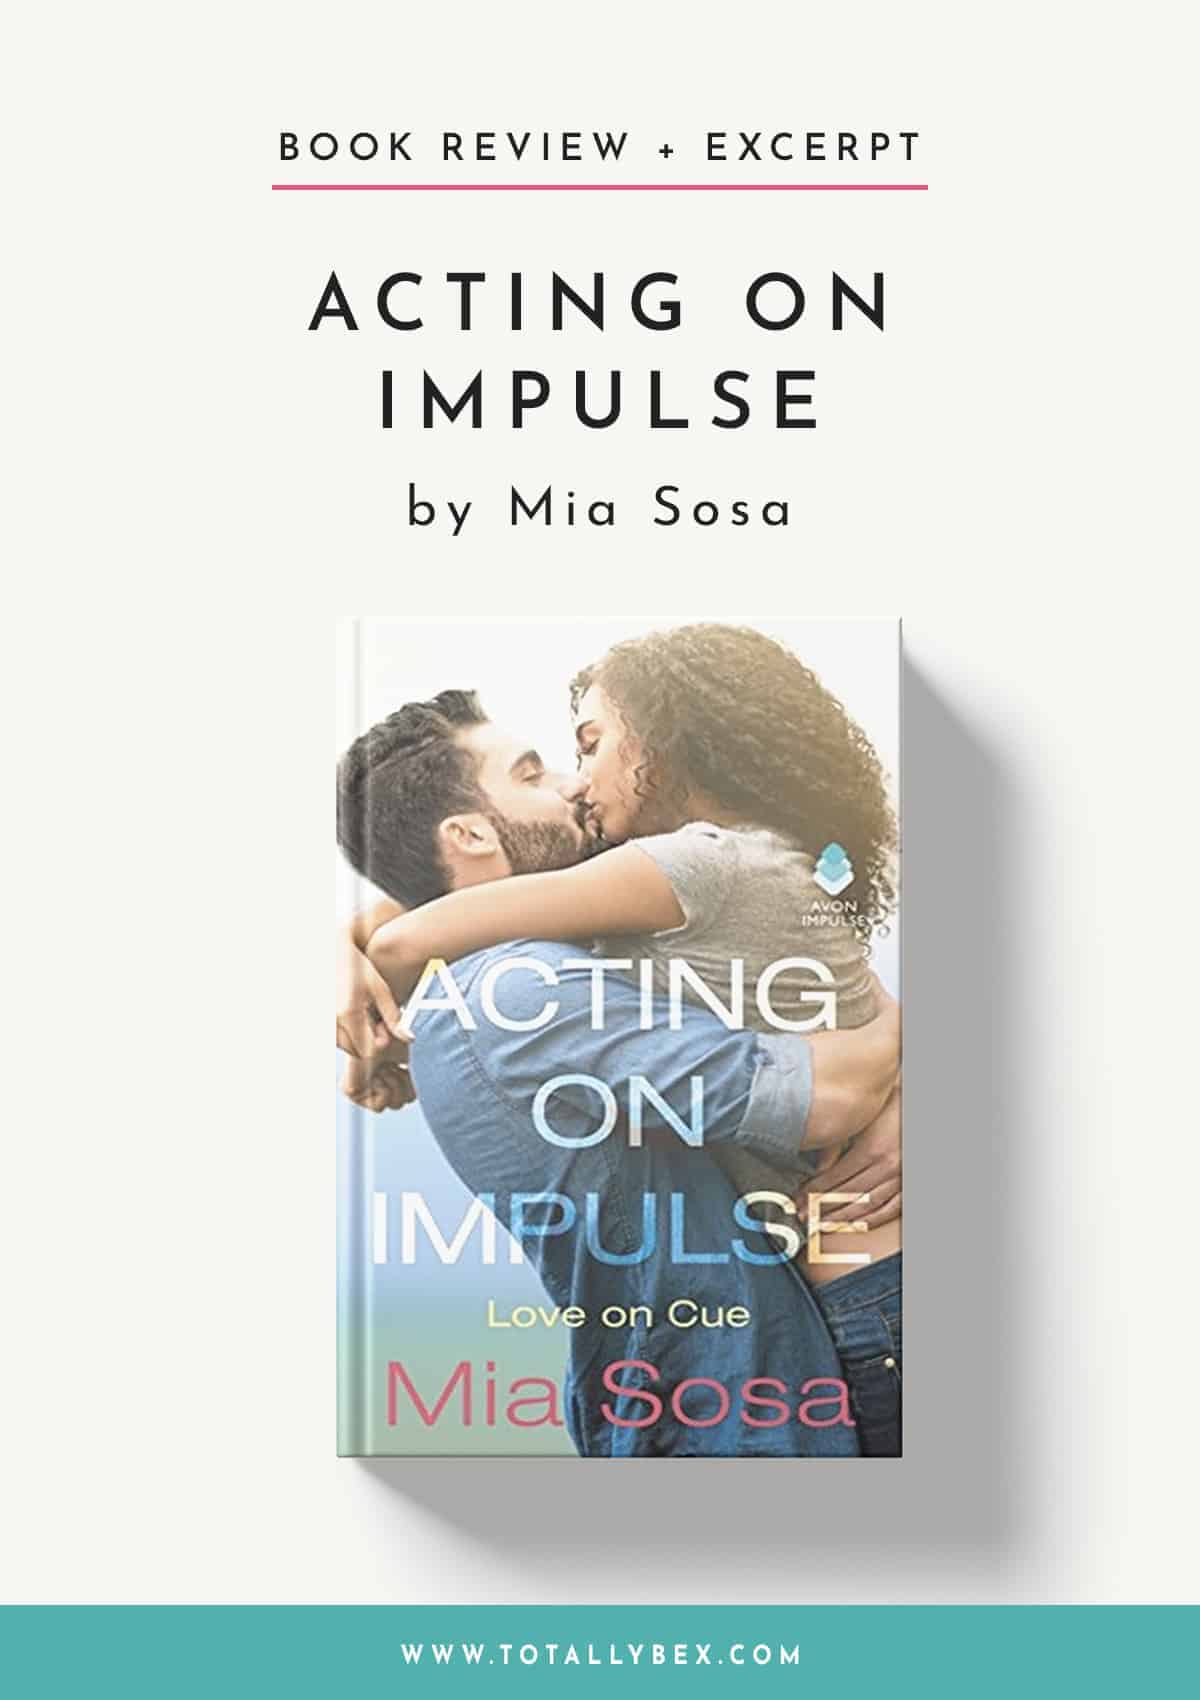 Acting on Impulse by Mia Sosa – Review + Excerpt